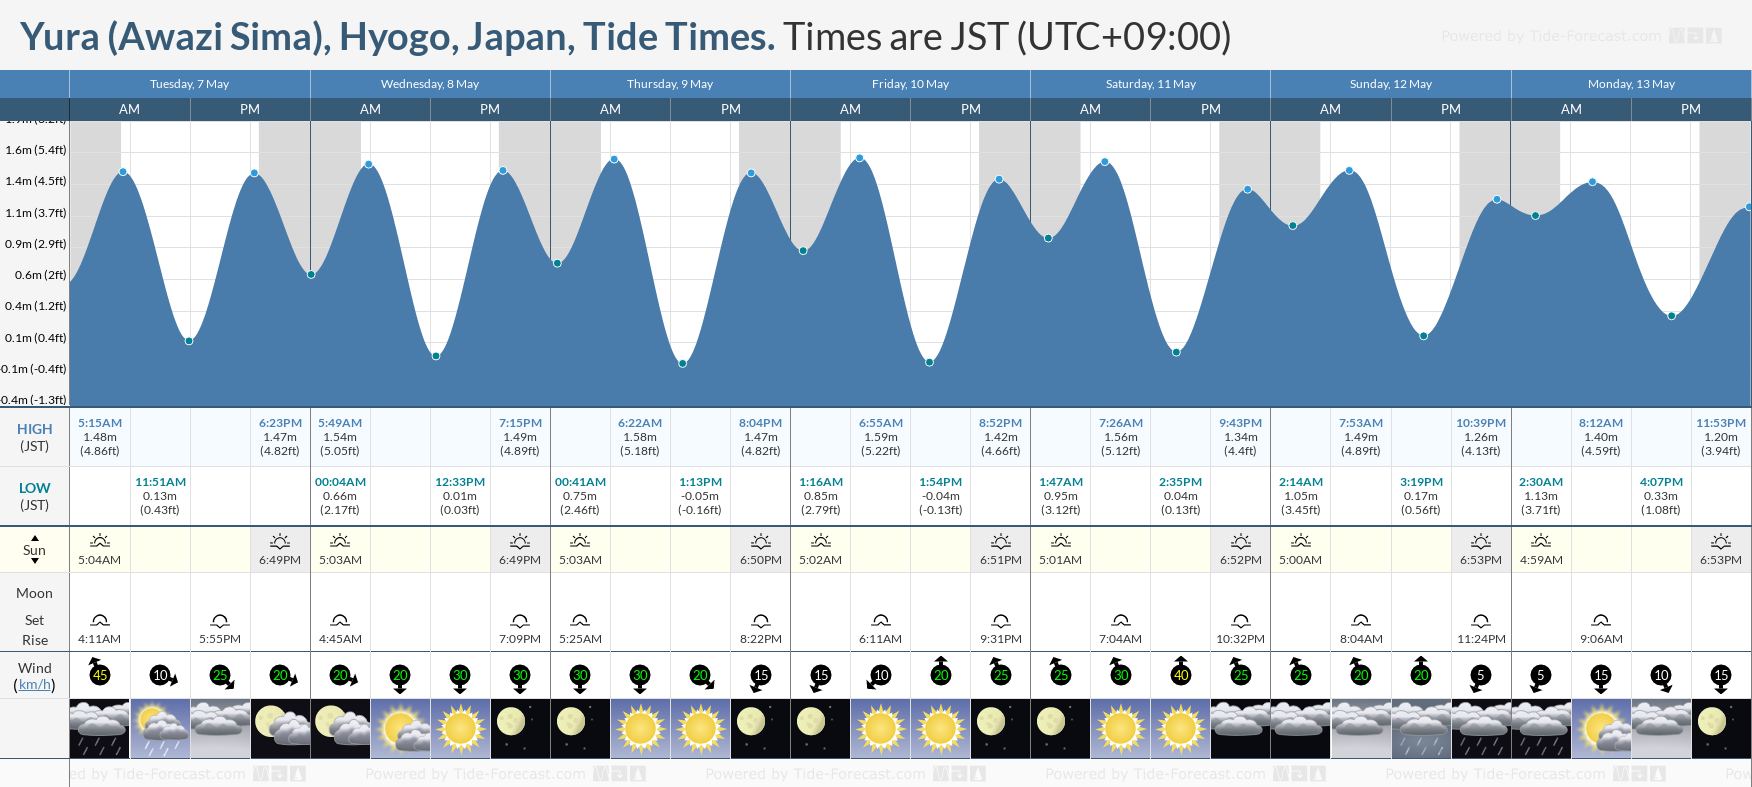 Yura (Awazi Sima), Hyogo, Japan Tide Chart including high and low tide tide times for the next 7 days